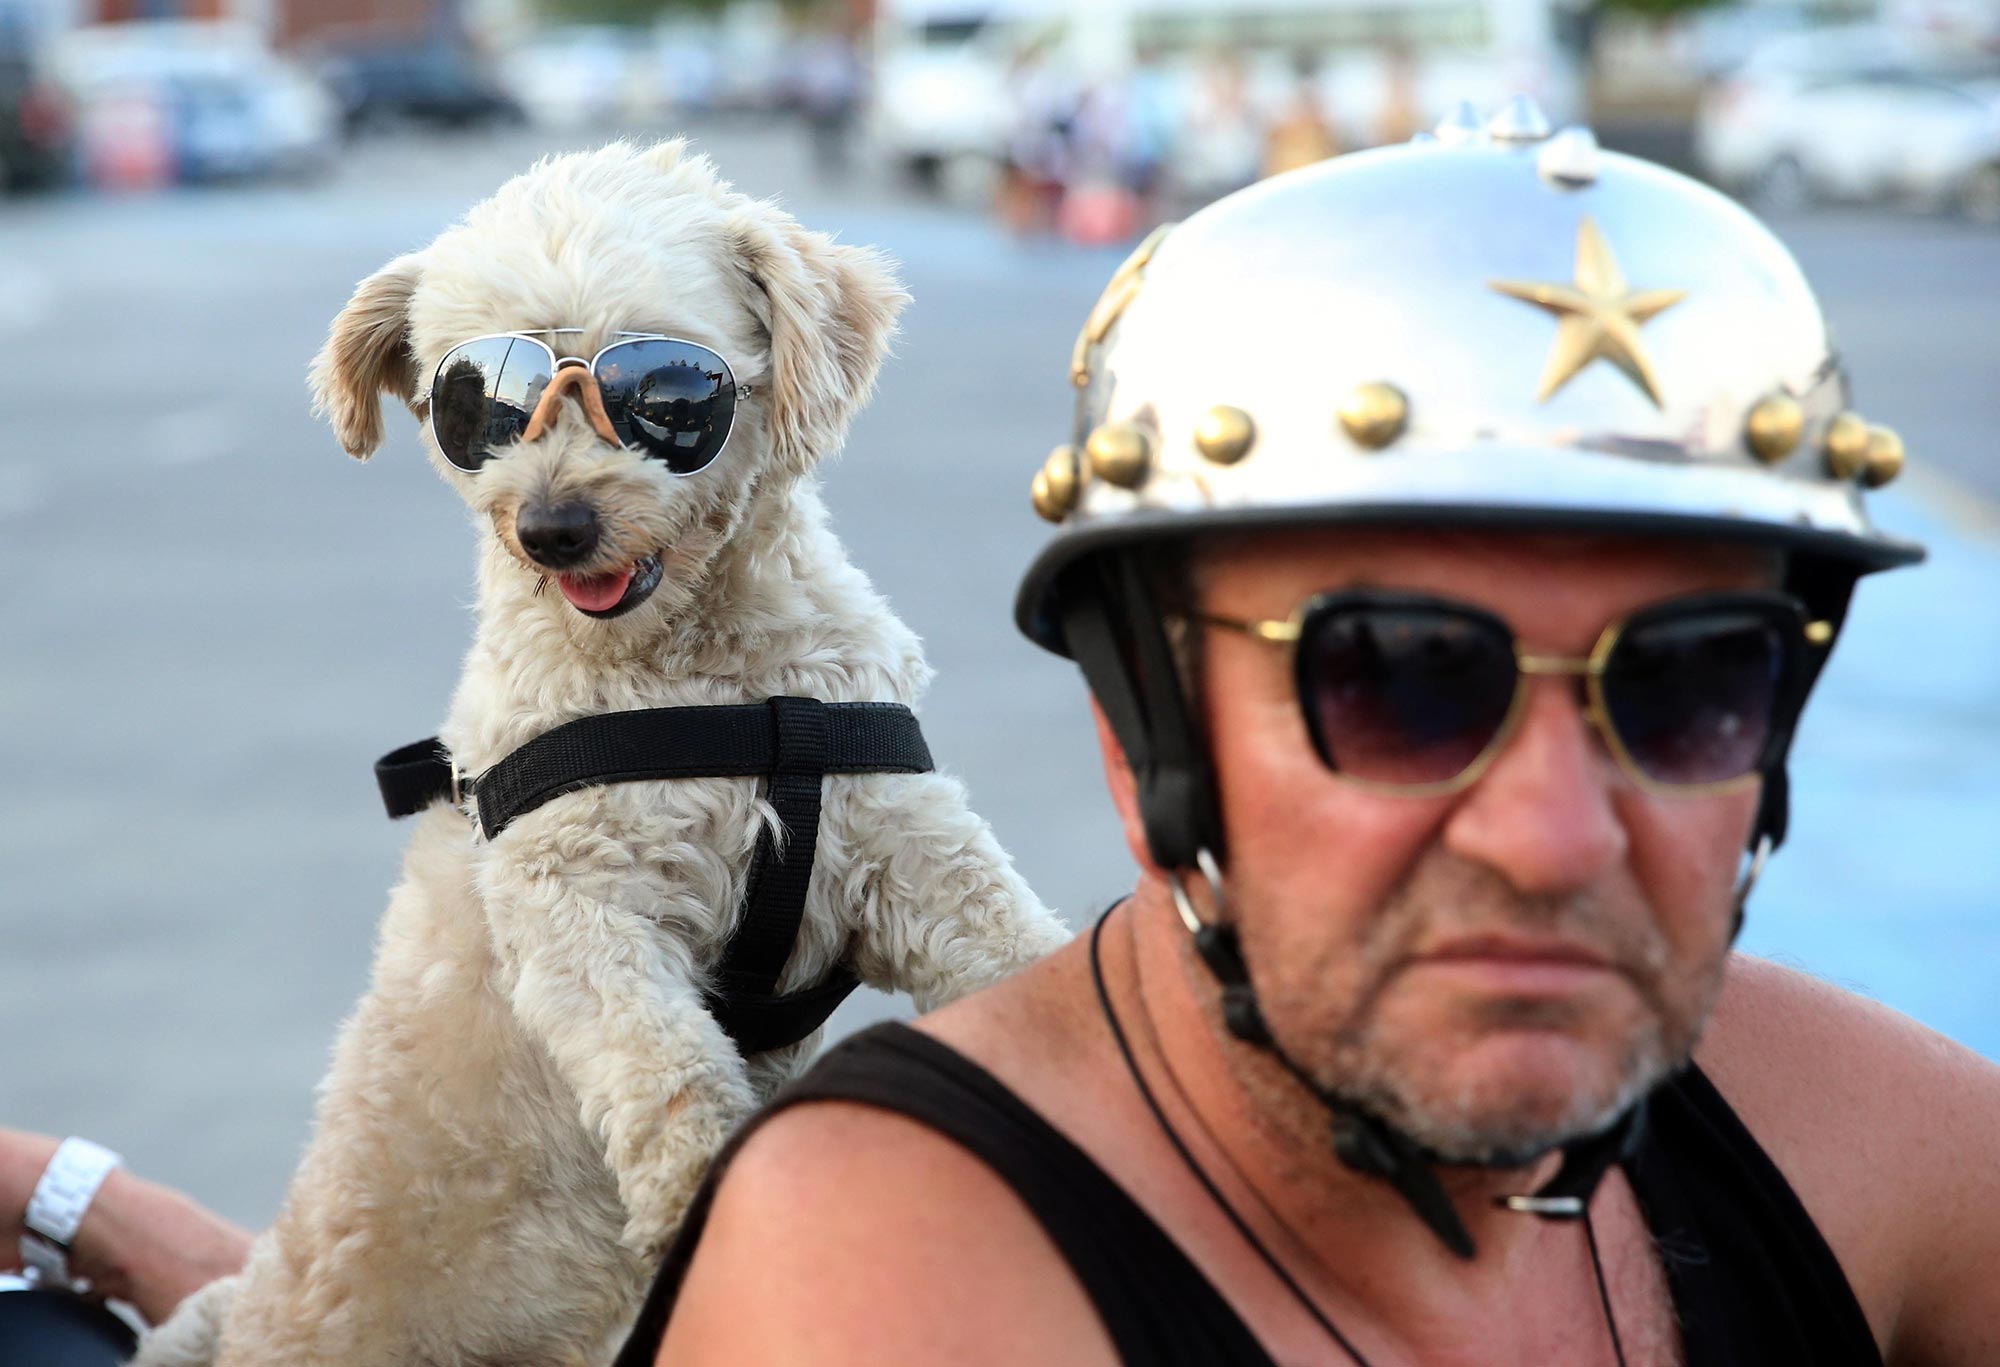 Haki Usta and his dog Kafe have been riding together for years–they even have matching shades